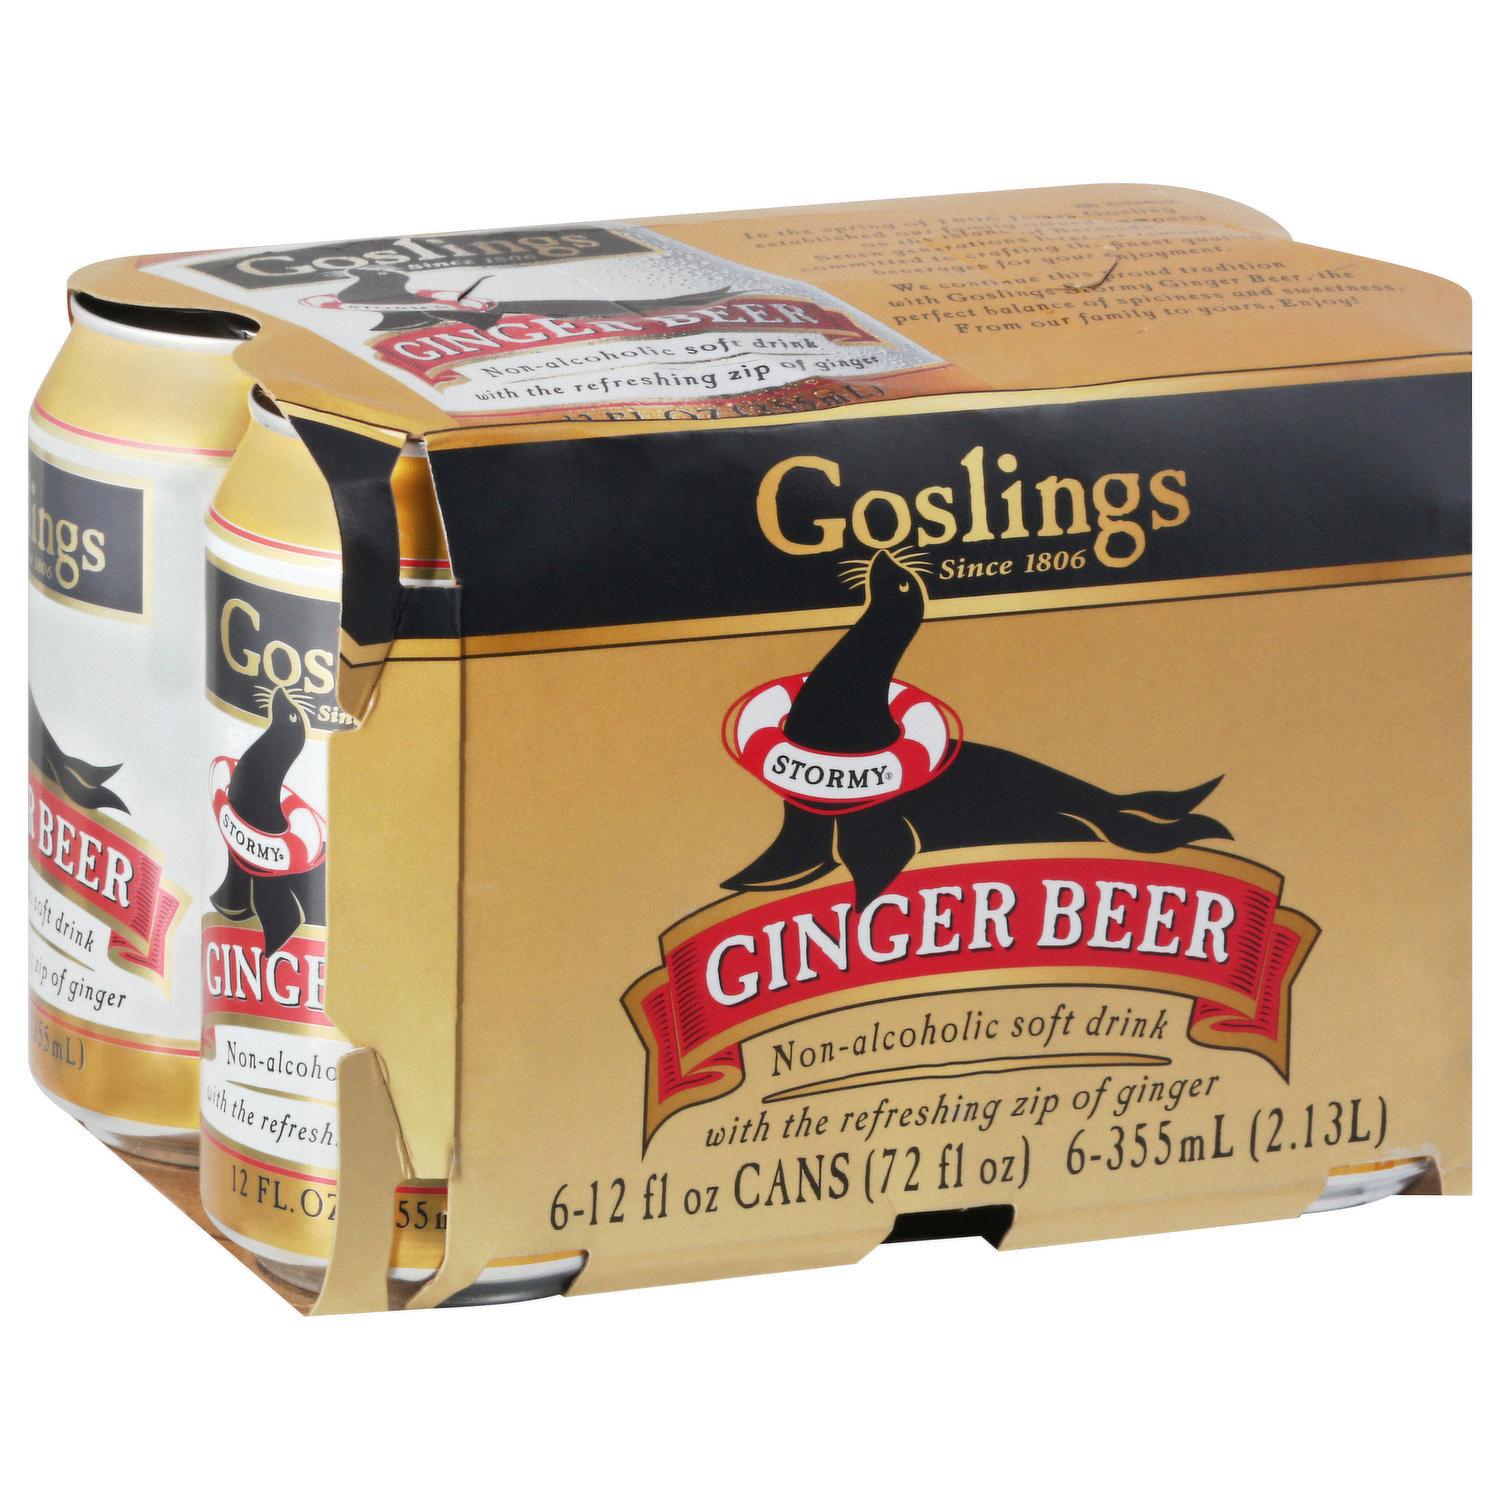 is goslings ginger beer alcoholic